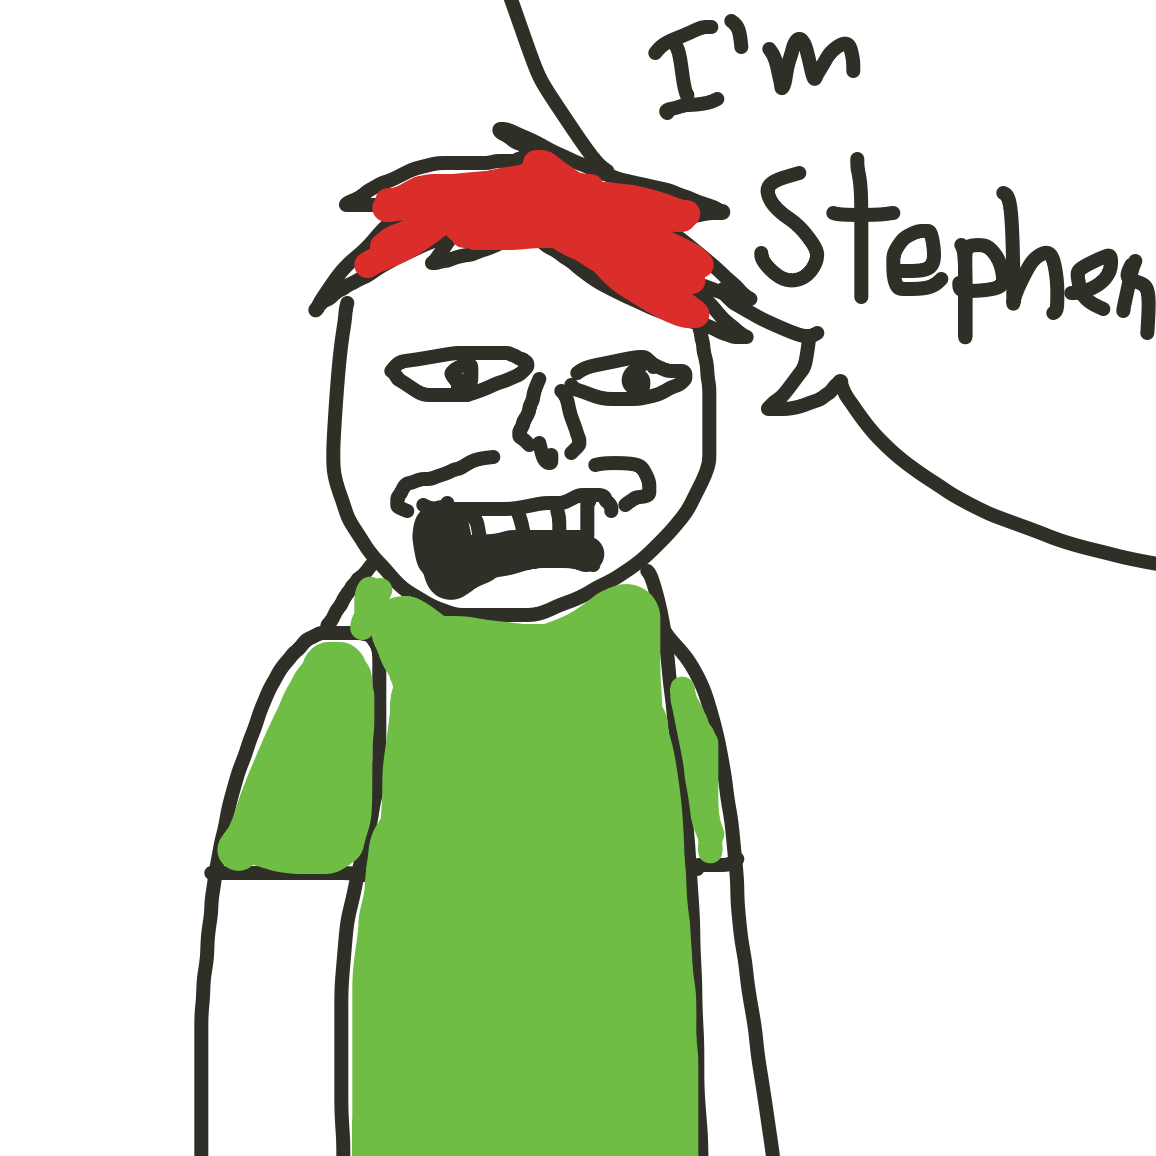 Drawing in Stephen by Uugh